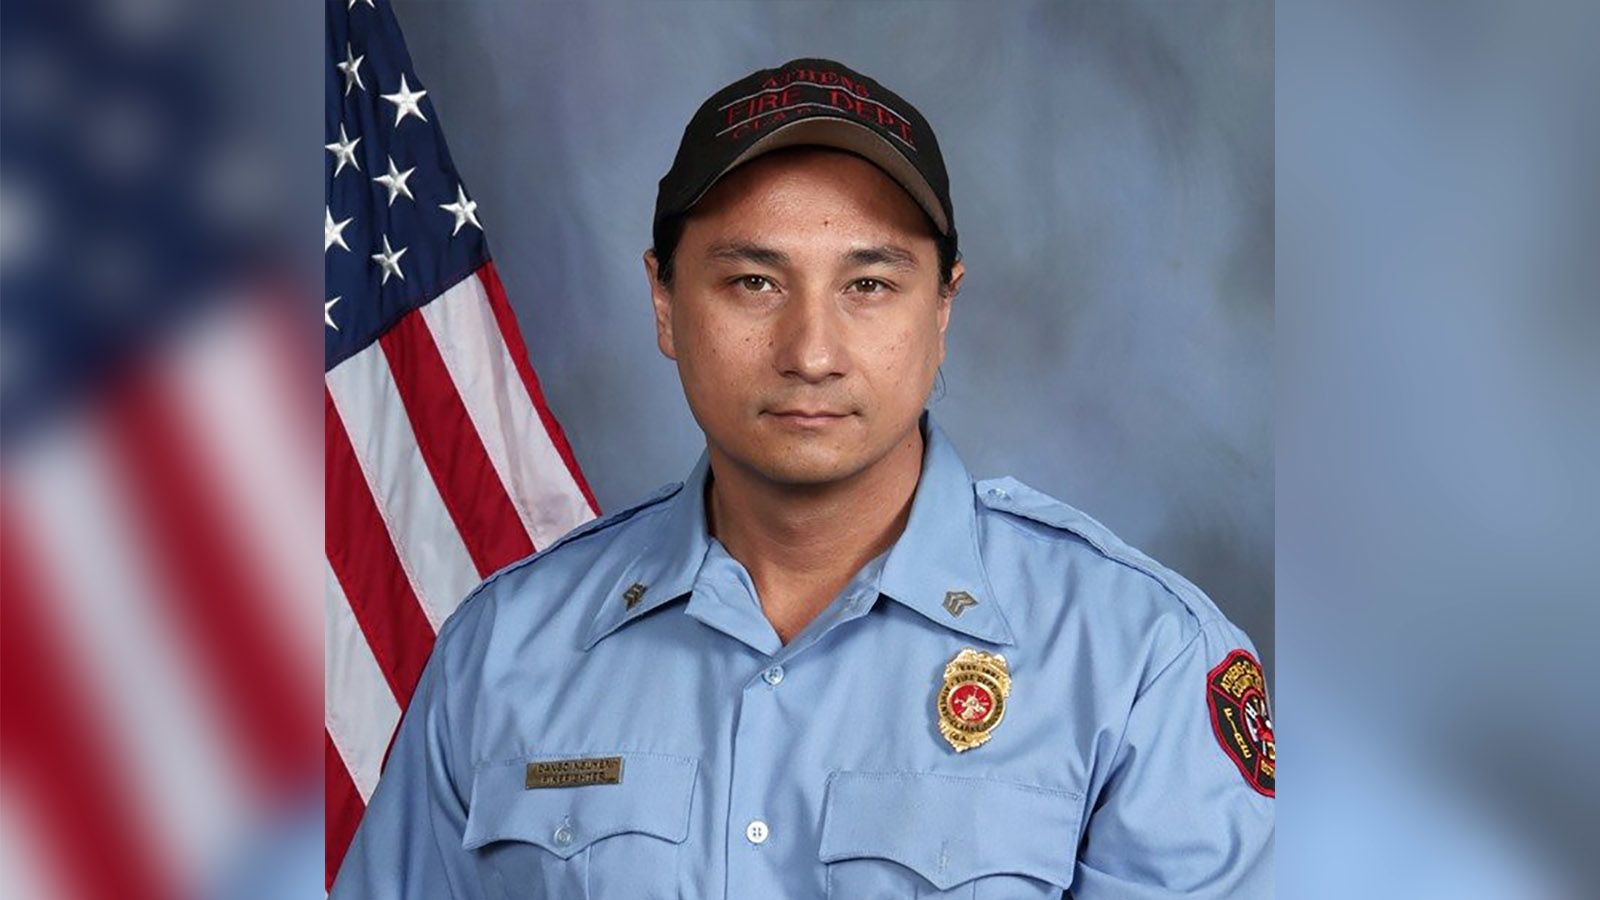 Former firefighter and "The Walking Dead" actor, Dango Nguyen, died Saturday after a battle with cancer, according to Georgia's Athens-Clarke County Fire department.